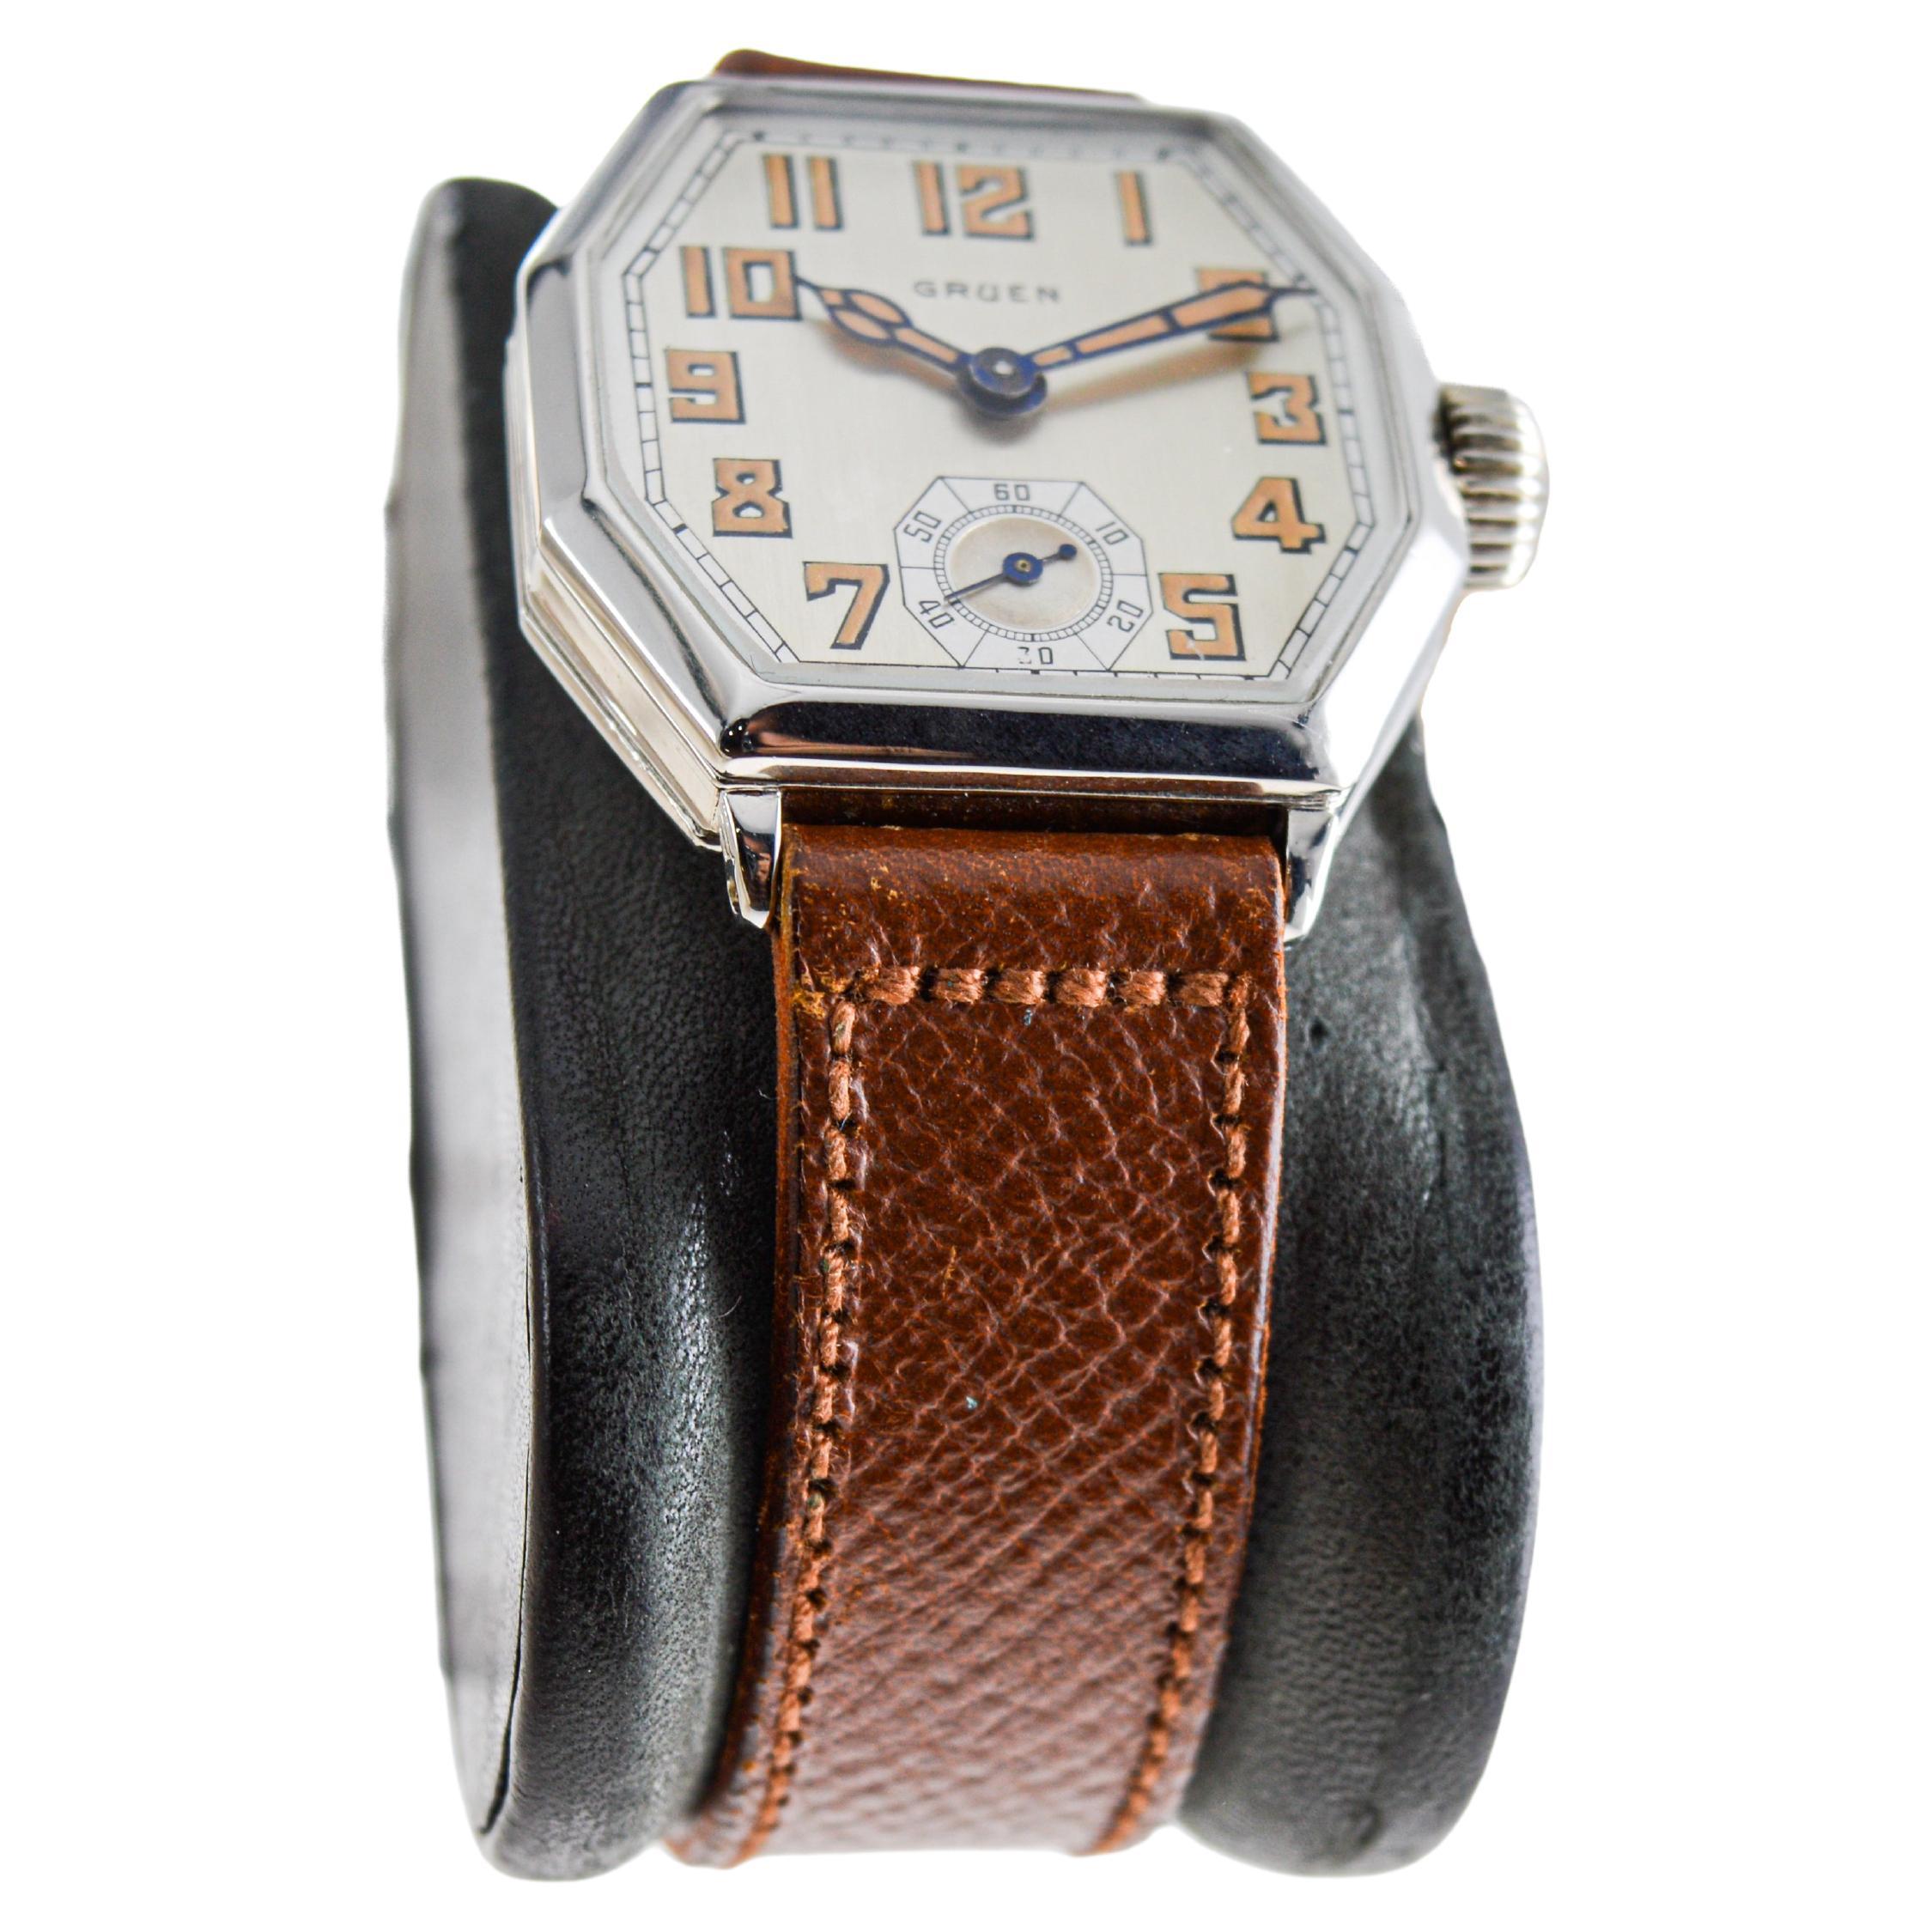 FACTORY / HOUSE: Gruen Watch Company
STYLE / REFERENCE: Art Deco / Octagon 
METAL / MATERIAL: 14Kt White Gold Filled
CIRCA / YEAR: 1928
DIMENSIONS / SIZE: Length 37mm X Diameter 30mm
MOVEMENT / CALIBER: Manual Winding / 15 Jewels / Caliber 707
DIAL